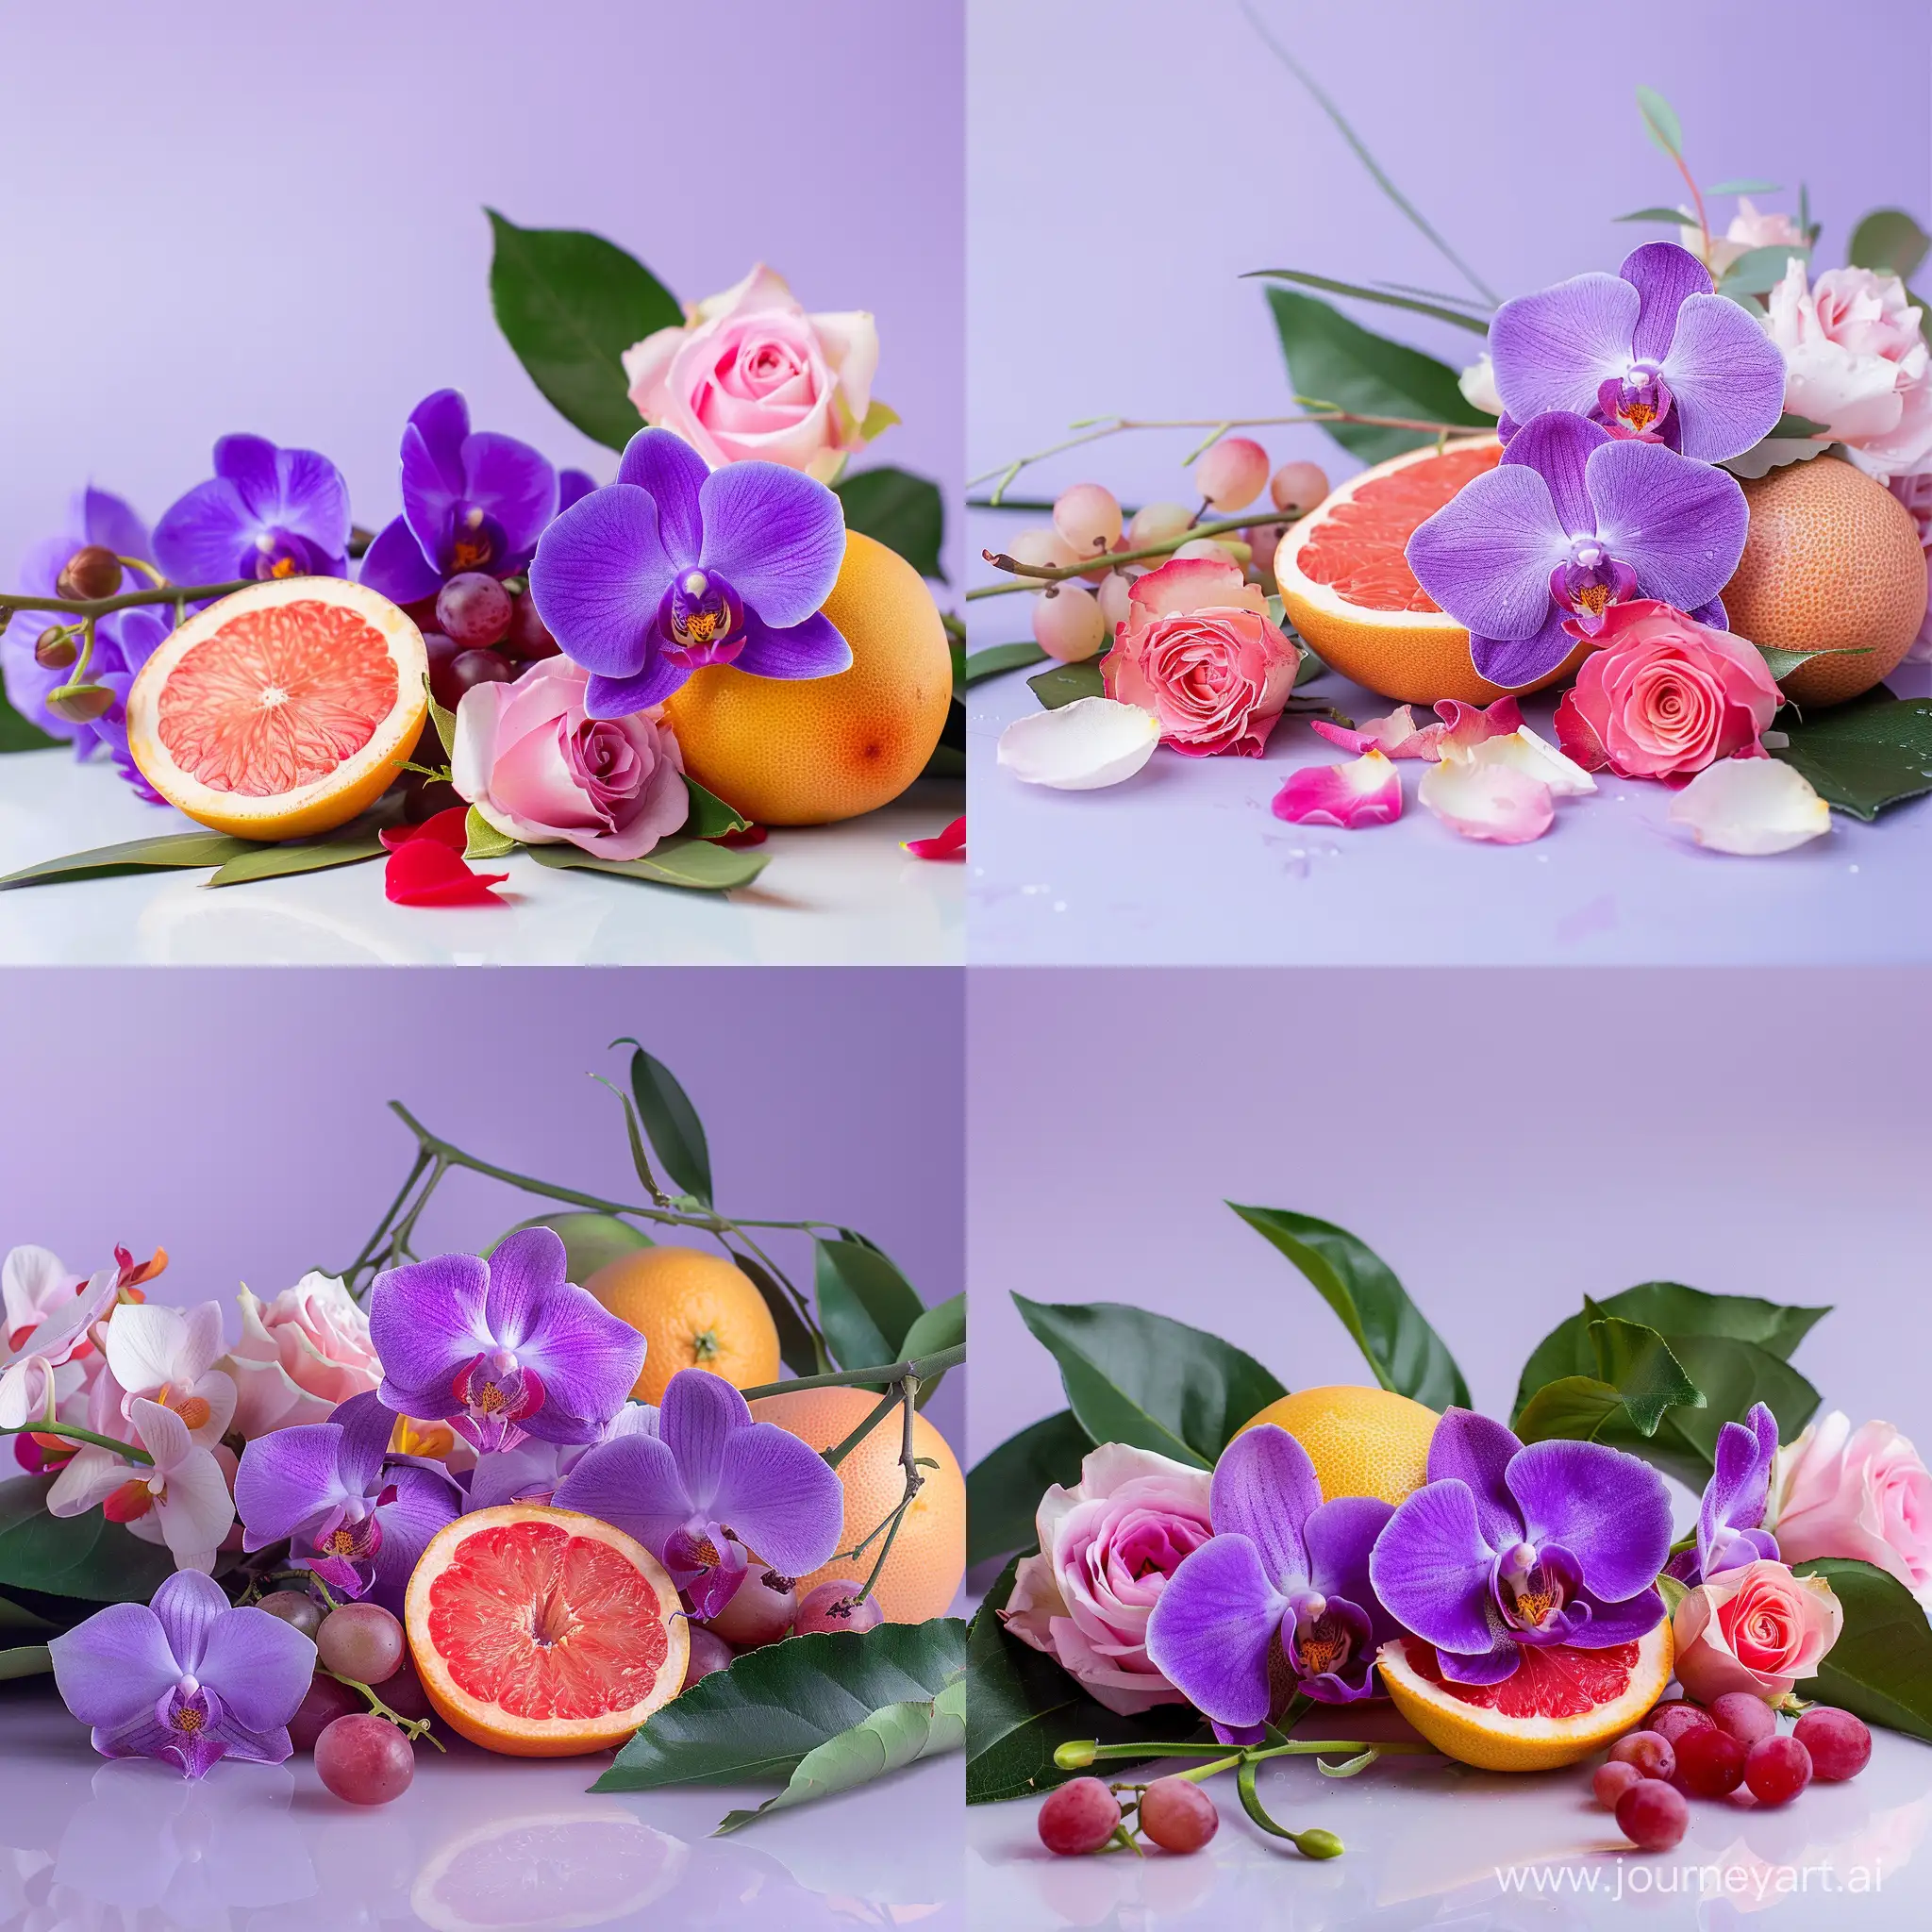 Exquisite-Purple-Orchids-Pink-Roses-and-Grapefruits-Arrangement-on-Glossy-Surface